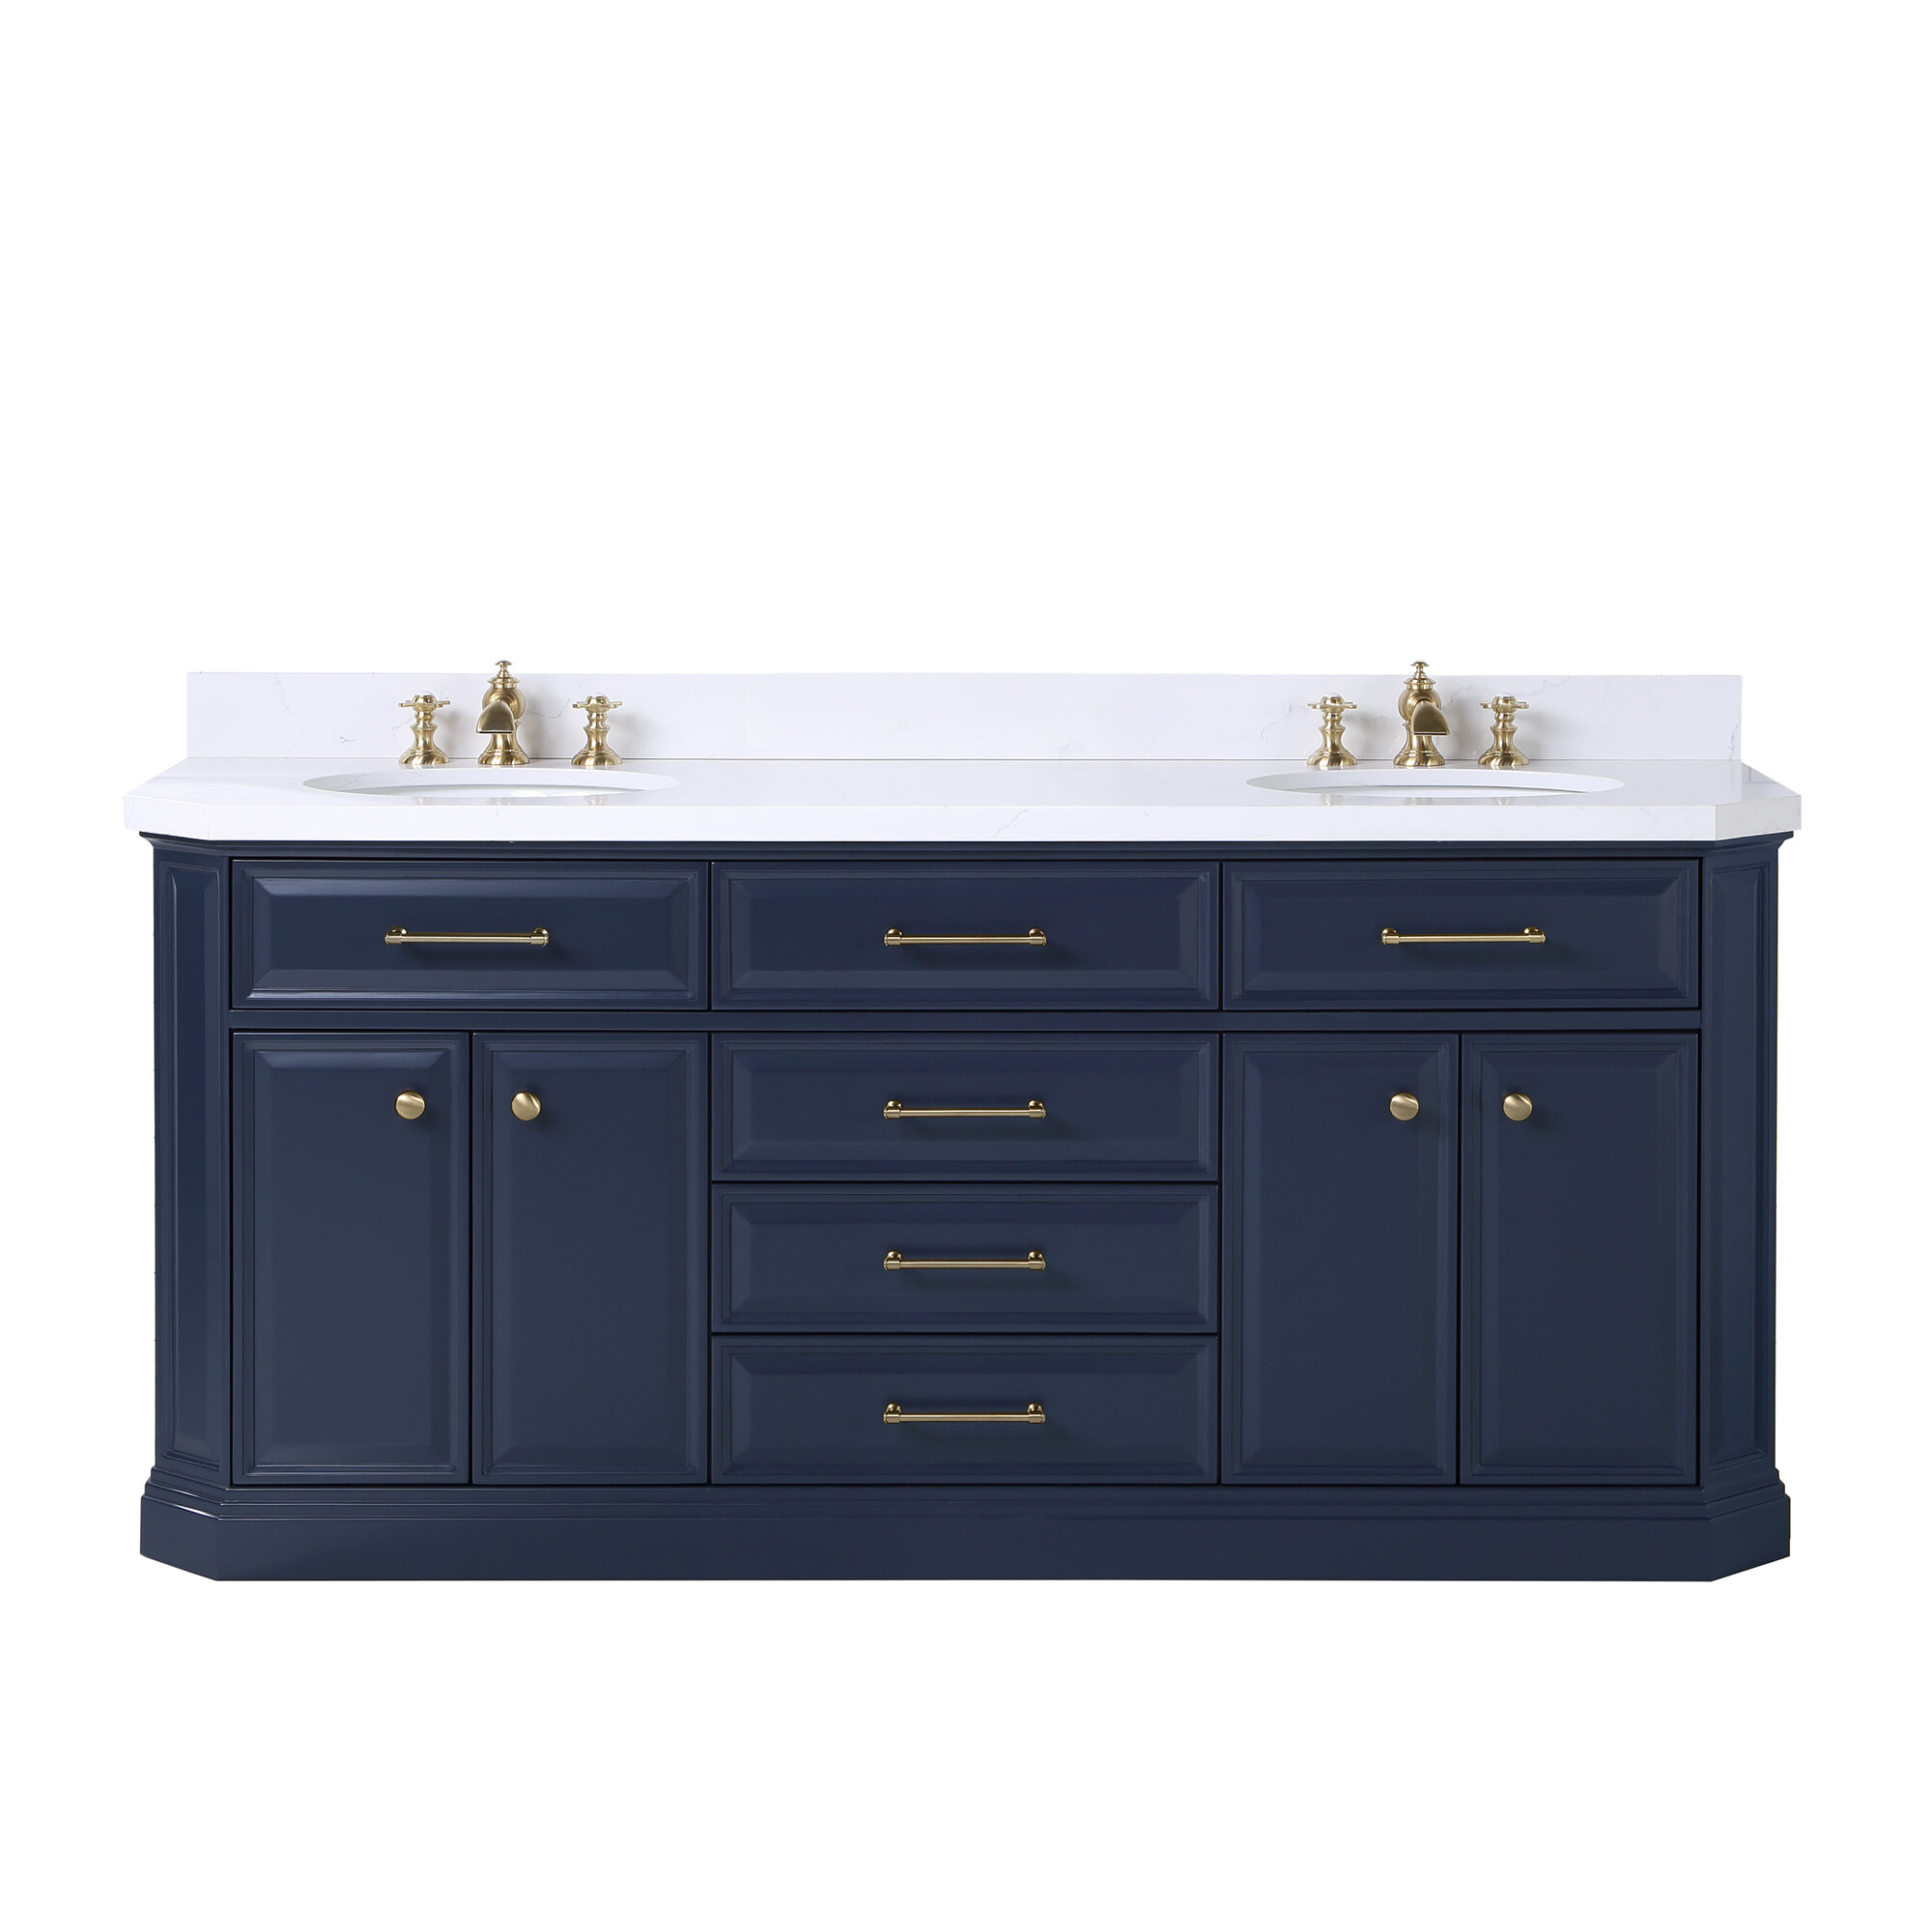 Gold Flamingo Caius 72 In Double Sink White Quartz Countertop Vanity In Monarch Blue With Waterfall Faucets Wayfair